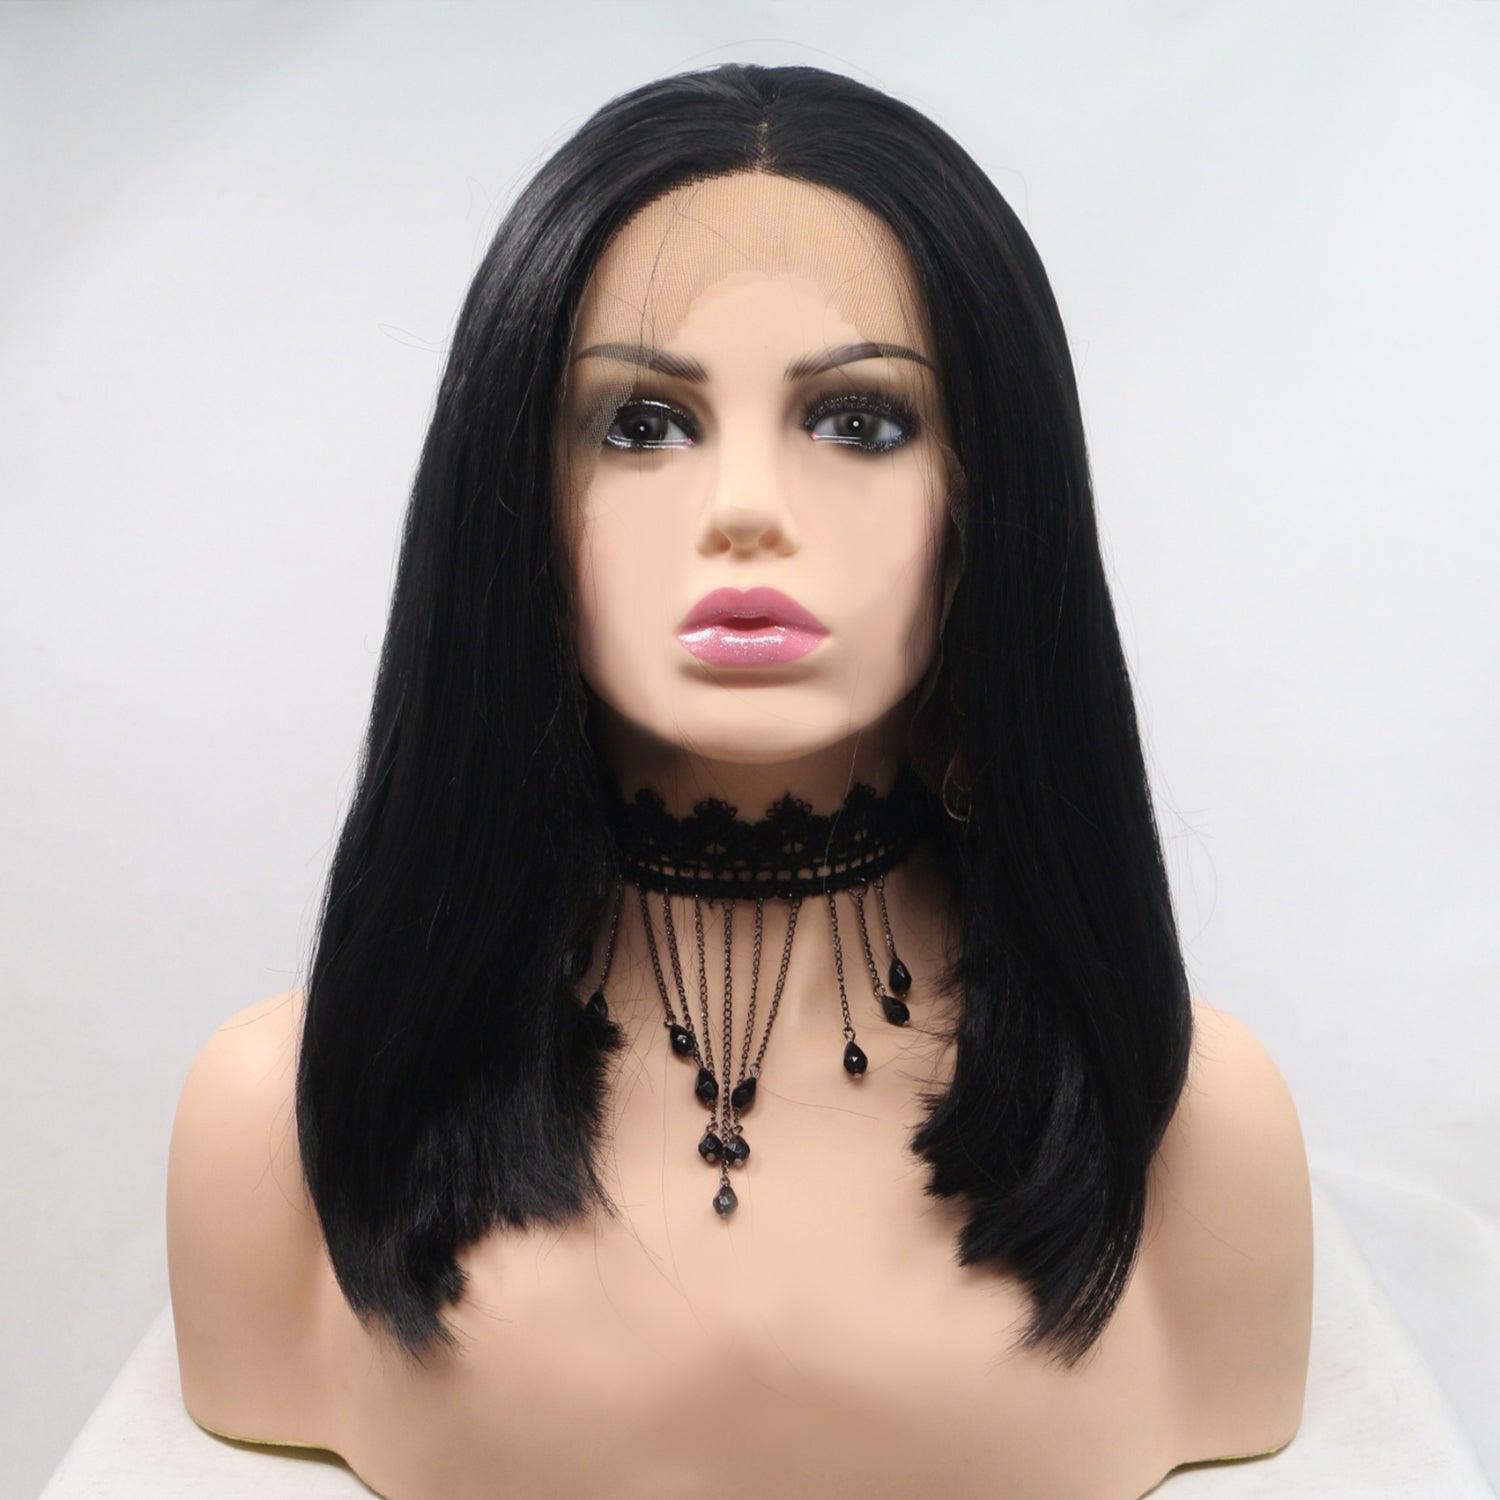 a mannequin head wearing a black wig